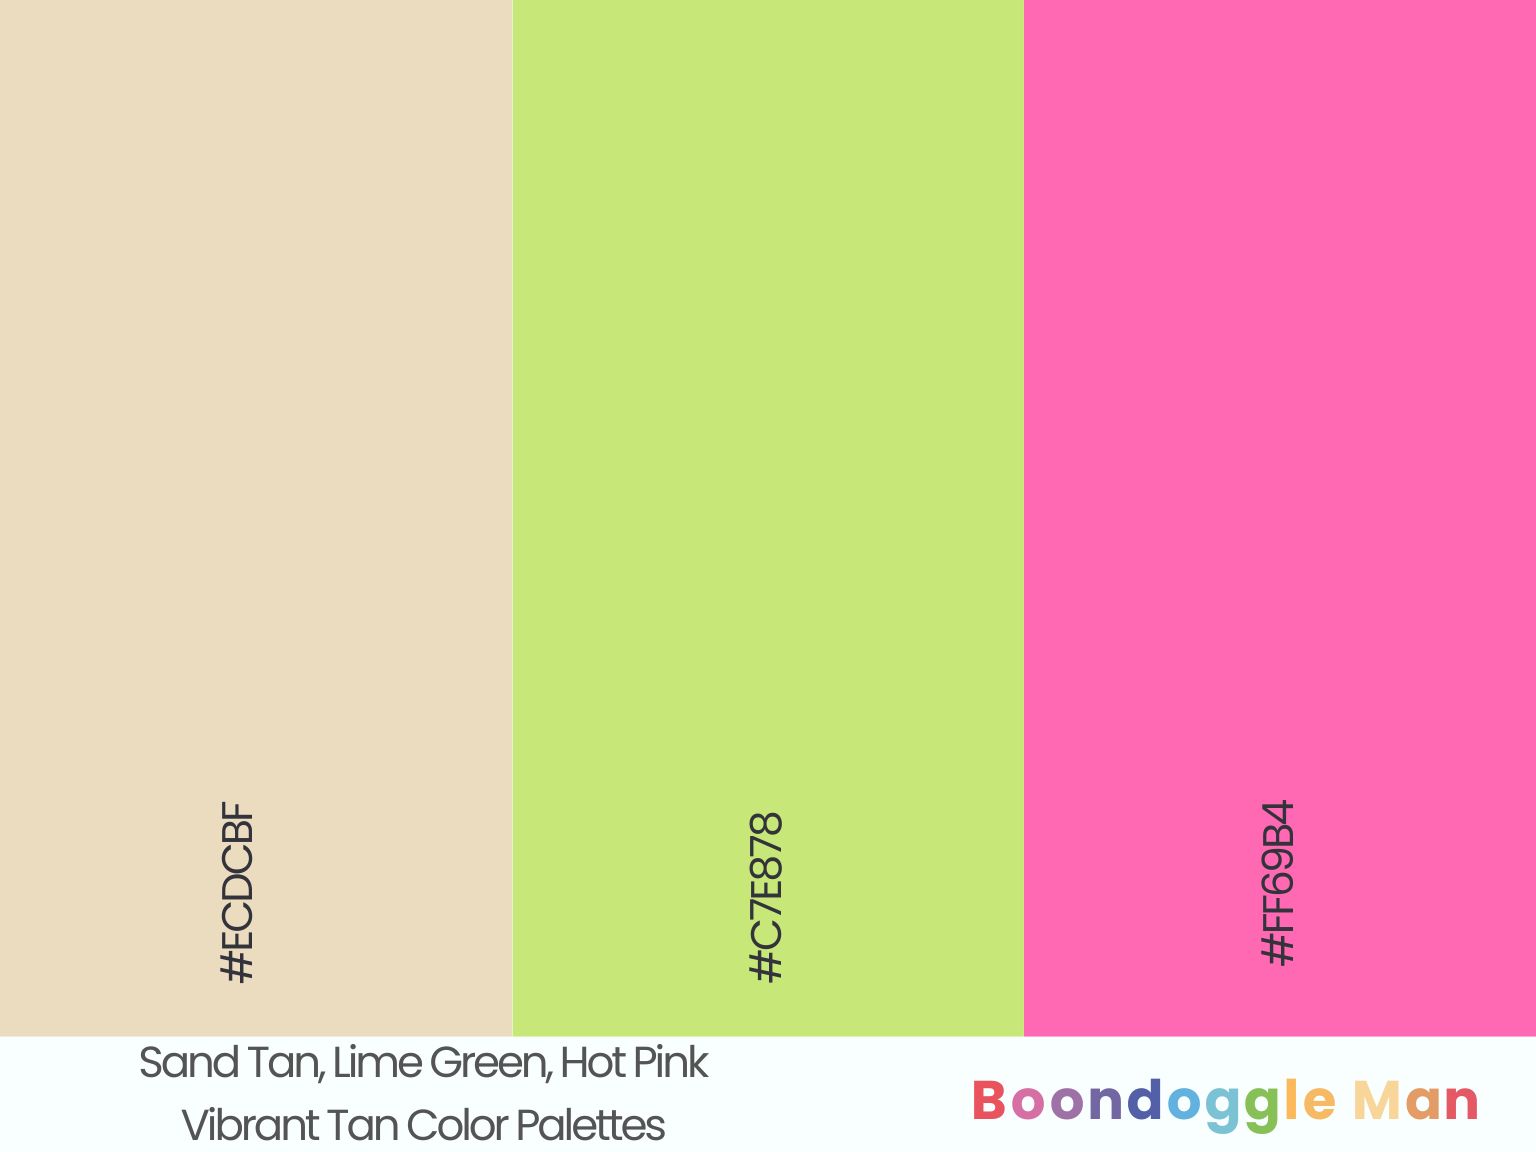 Sand Tan, Lime Green, Hot Pink